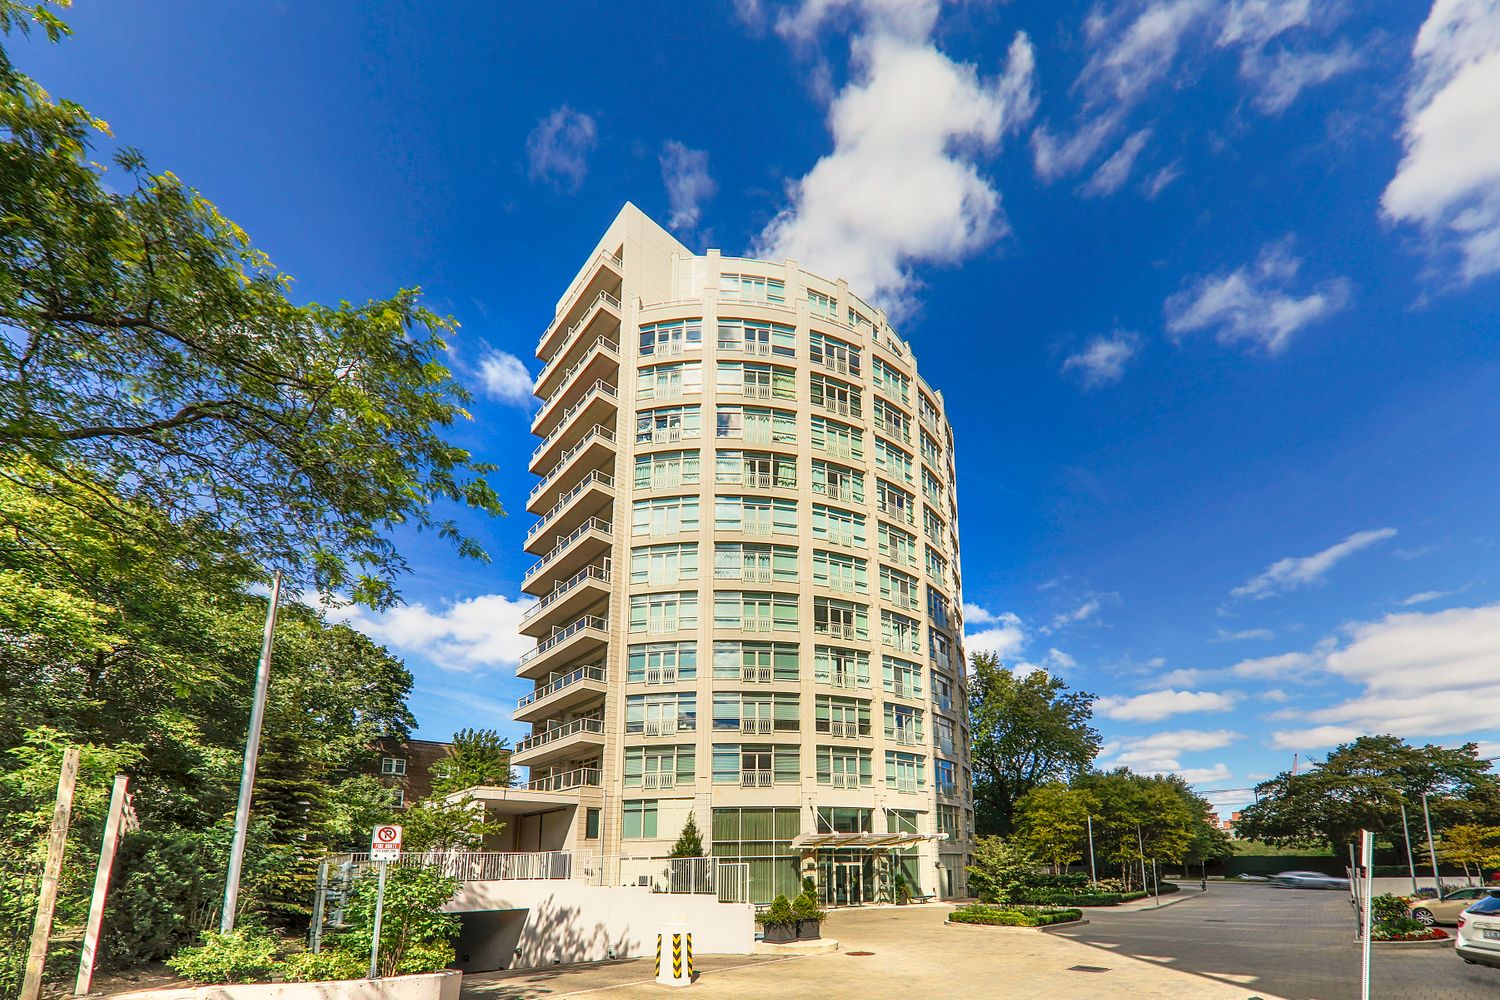 336 Spadina Road. Churchill Park Condos is located in  Midtown, Toronto - image #1 of 4